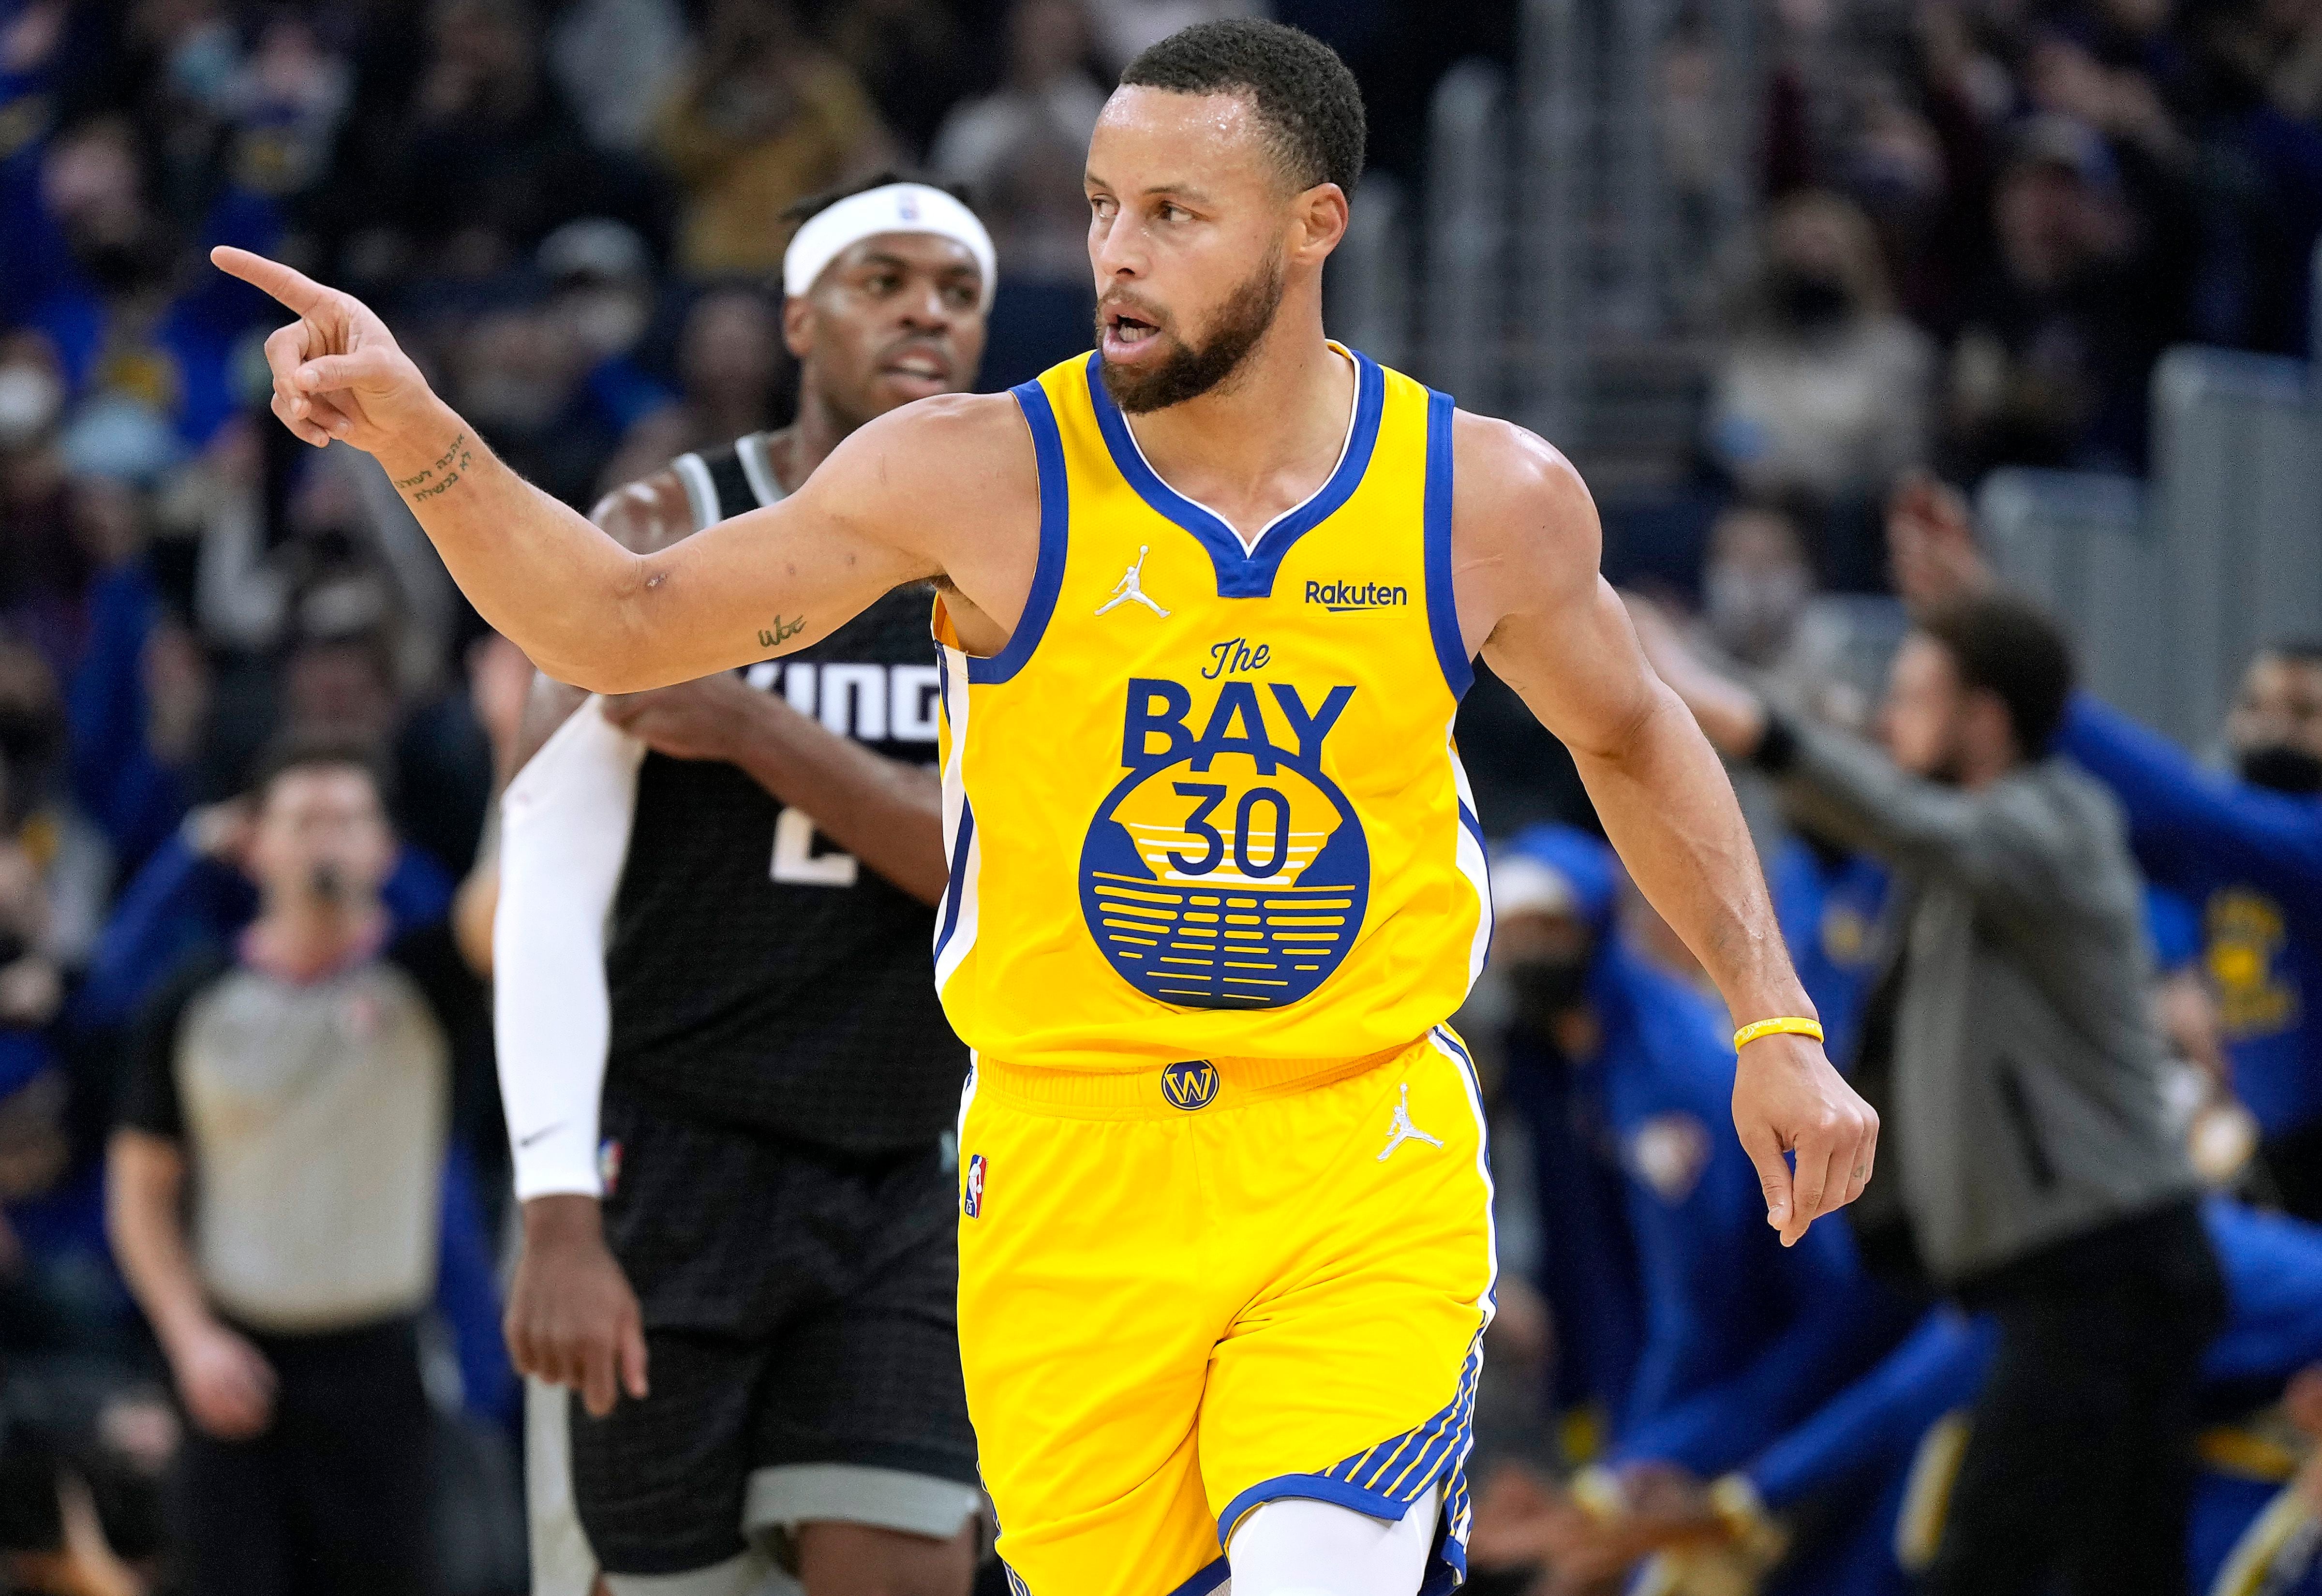 toddler the bay stephen curry worn jersey